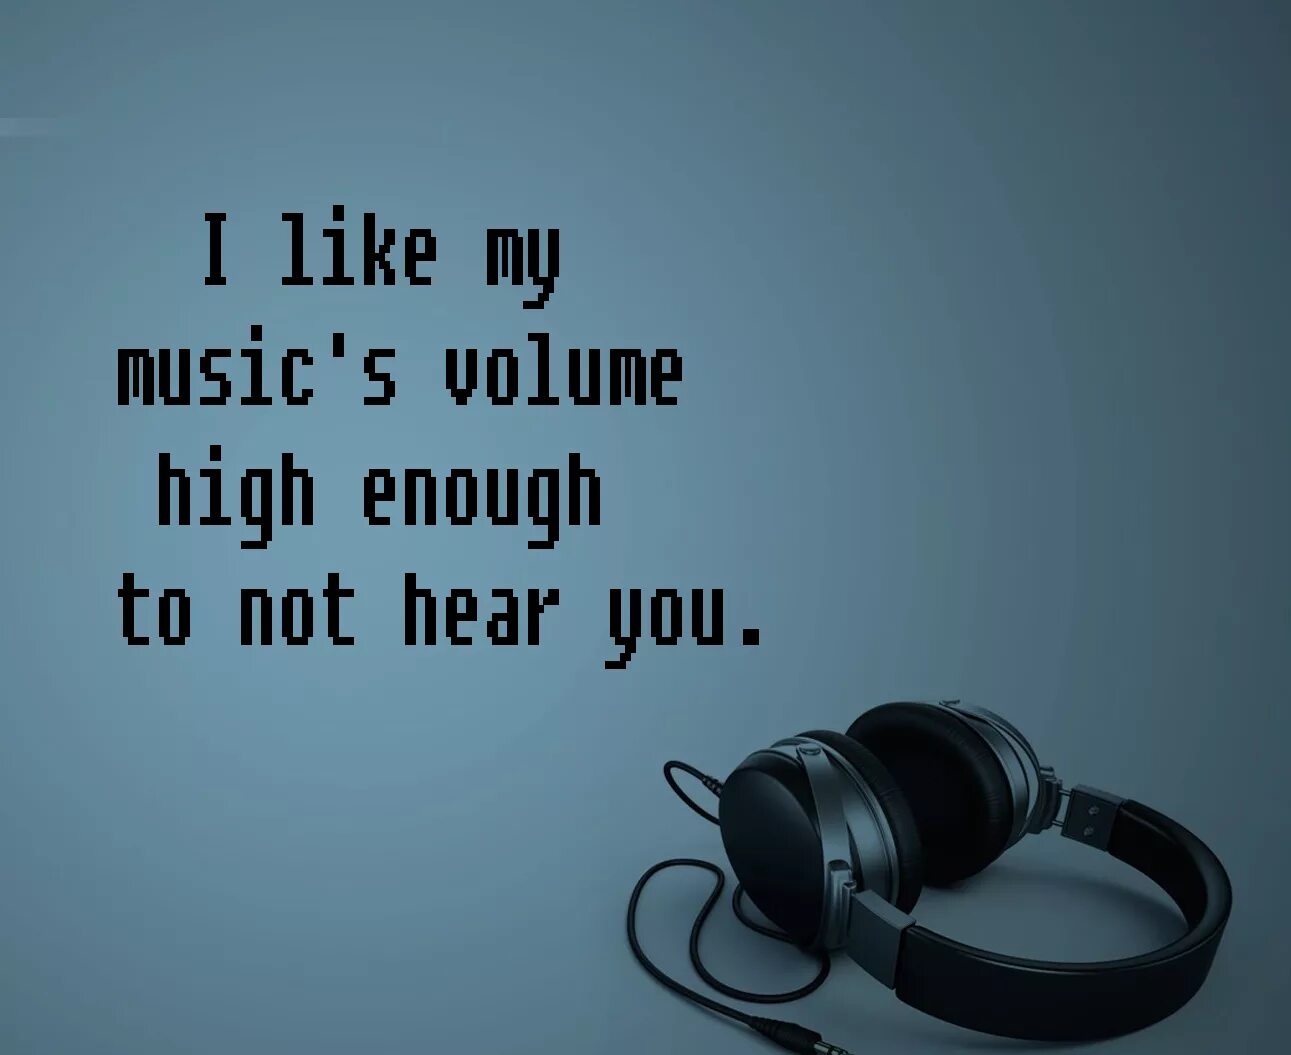 Music quotes. Quotes about Music. Saying about Music. Words about Music.